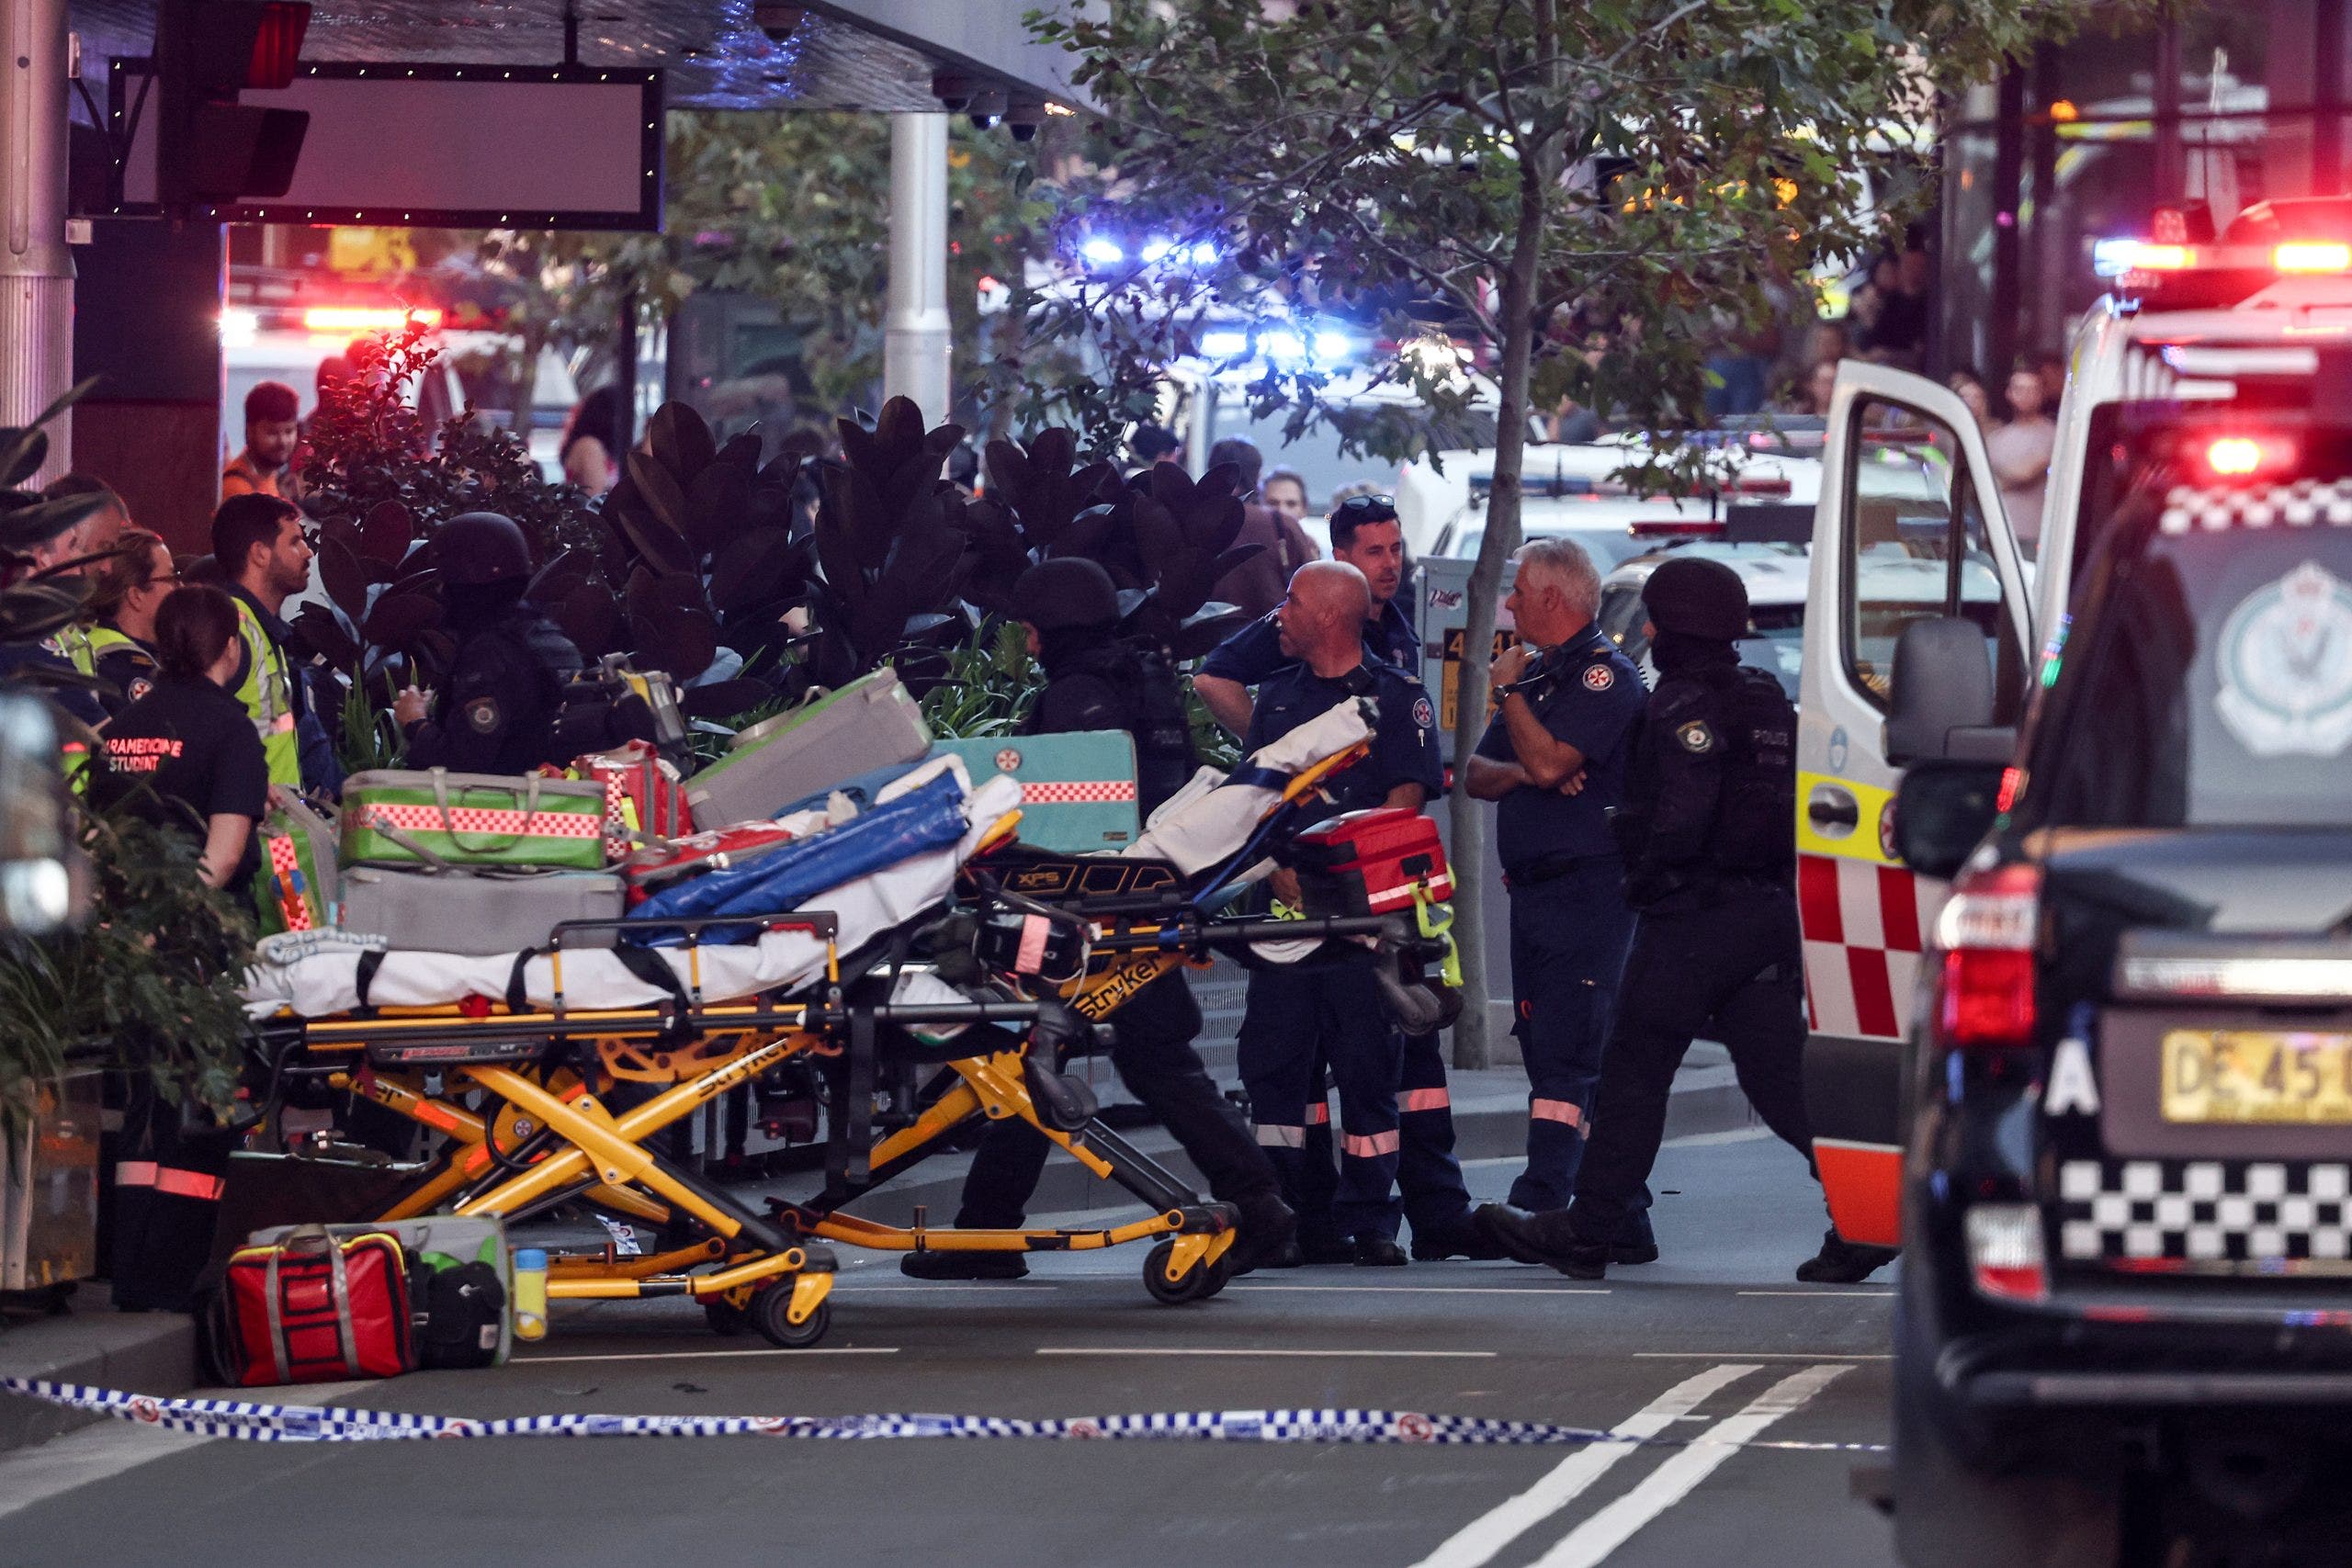 Mother dies after begging strangers to save her baby during Sydney stabbing spree